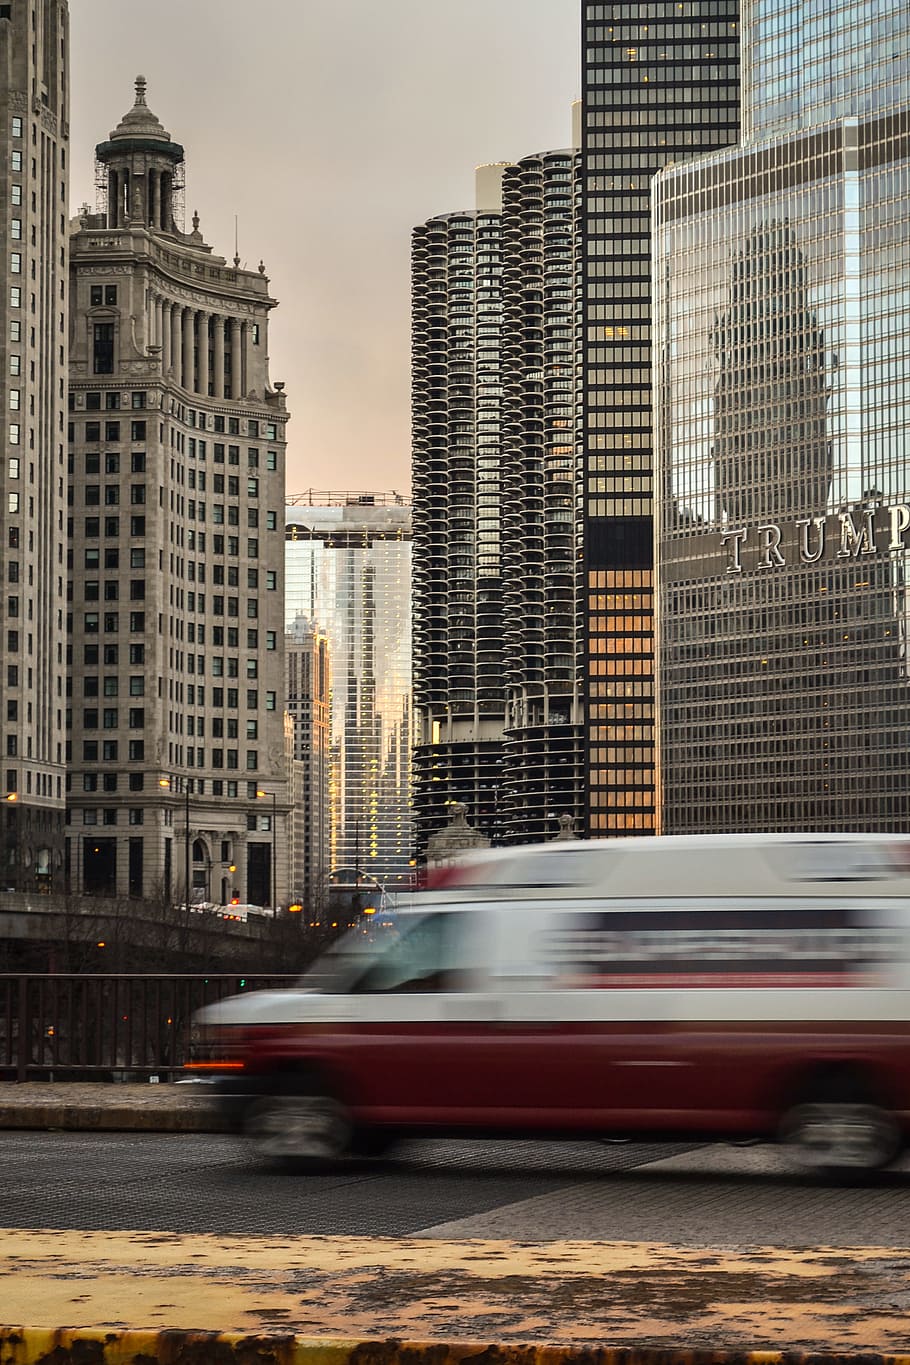 A blurry car on a bridge in a city with skyscrapers at the back, red and white van on road near glass building at daytime, HD wallpaper